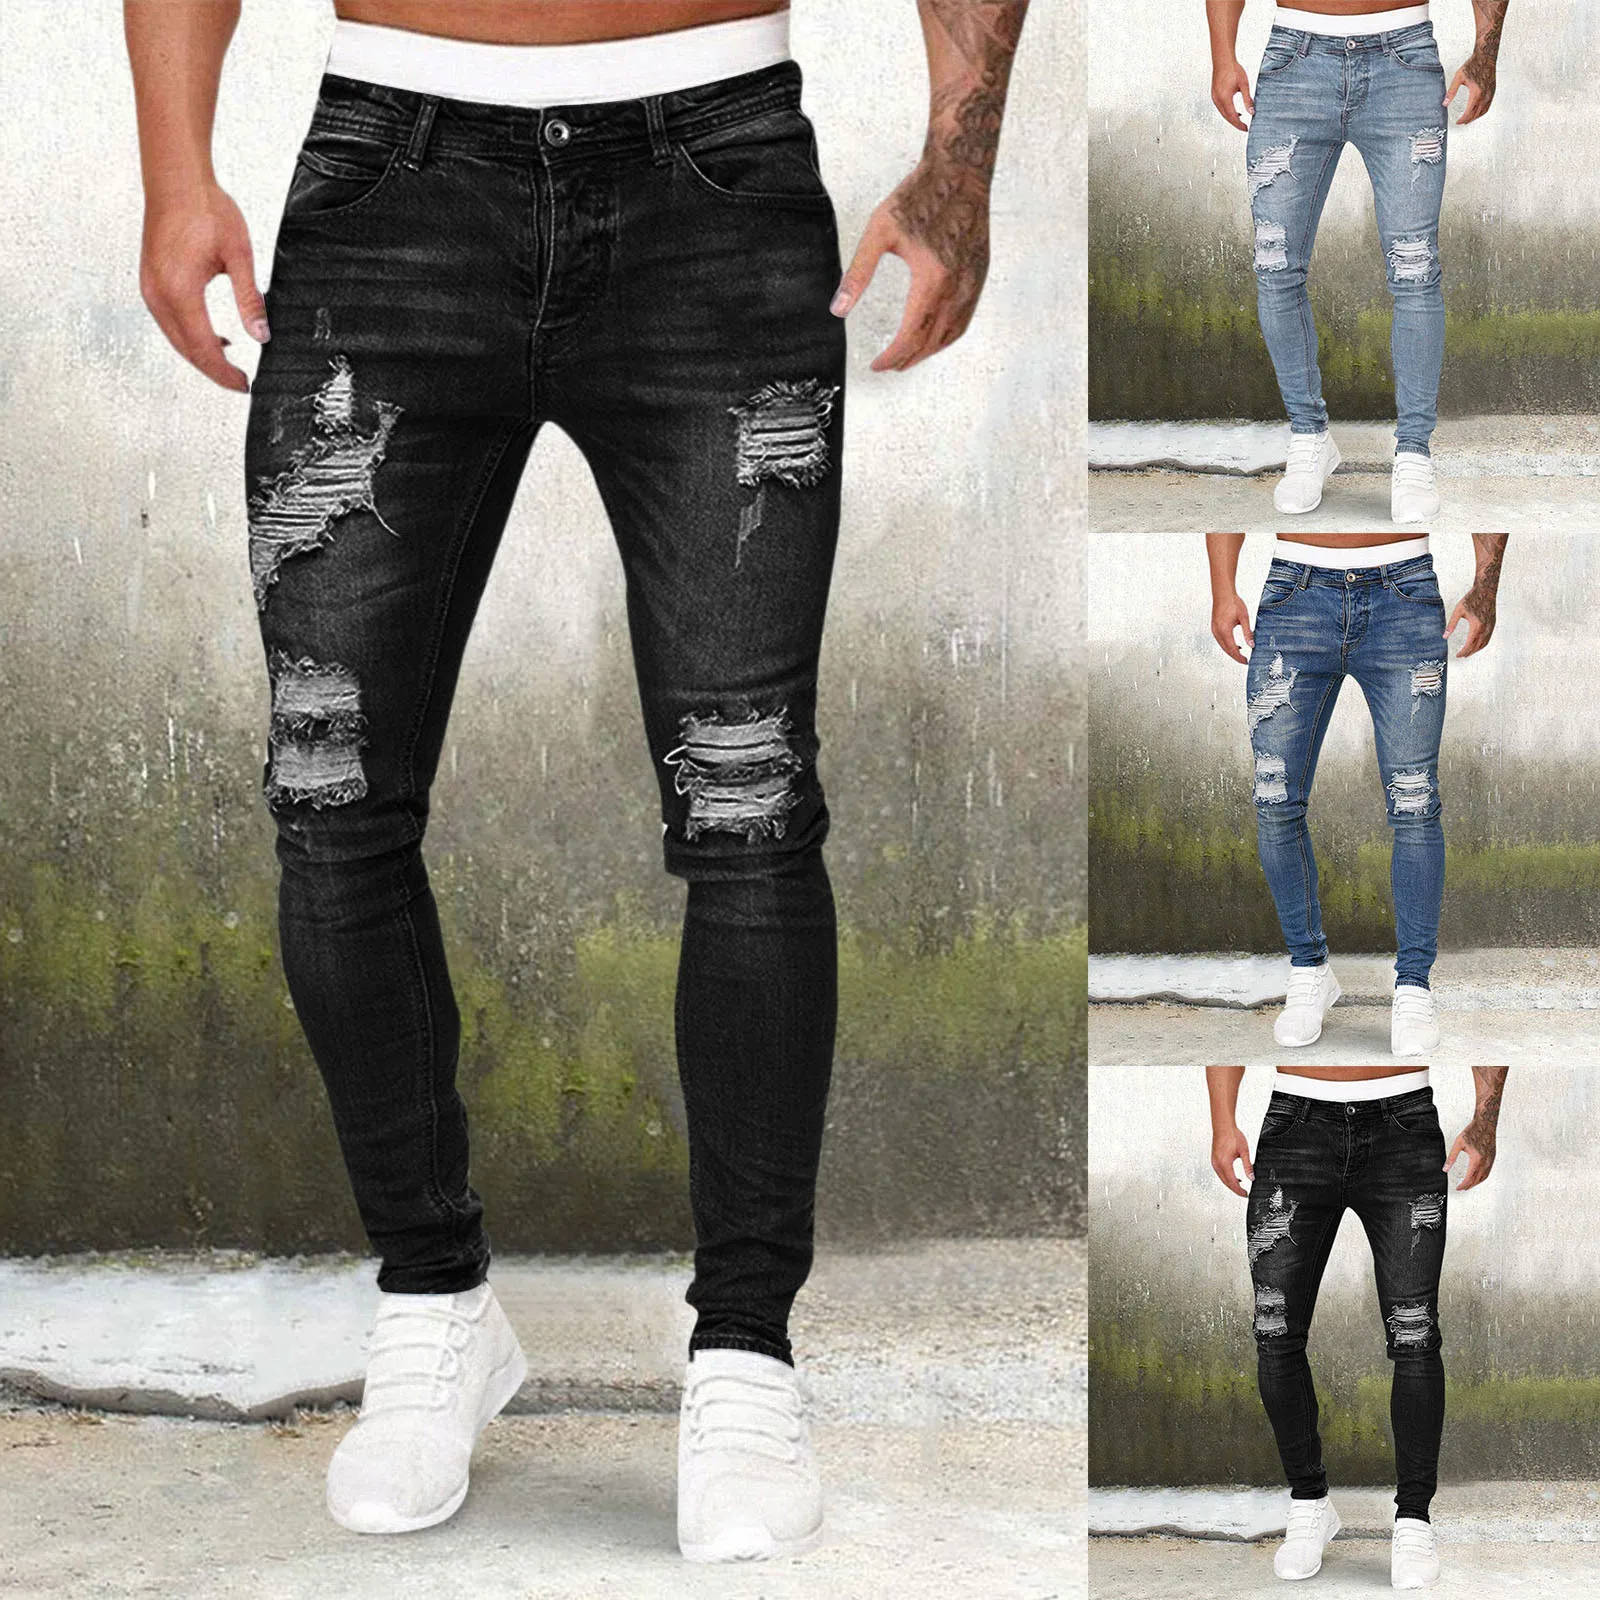 Europe America Mens Ripped Skinny Jeans Blue Slim Hole Pencil Pants Biker Casual Trousers Streetwear High Quality Denim Clothing trend 2020 jeans demin pants men skinny jeans male fashion hole ripped pants streetwear mens denim jeans blue pencil trousers